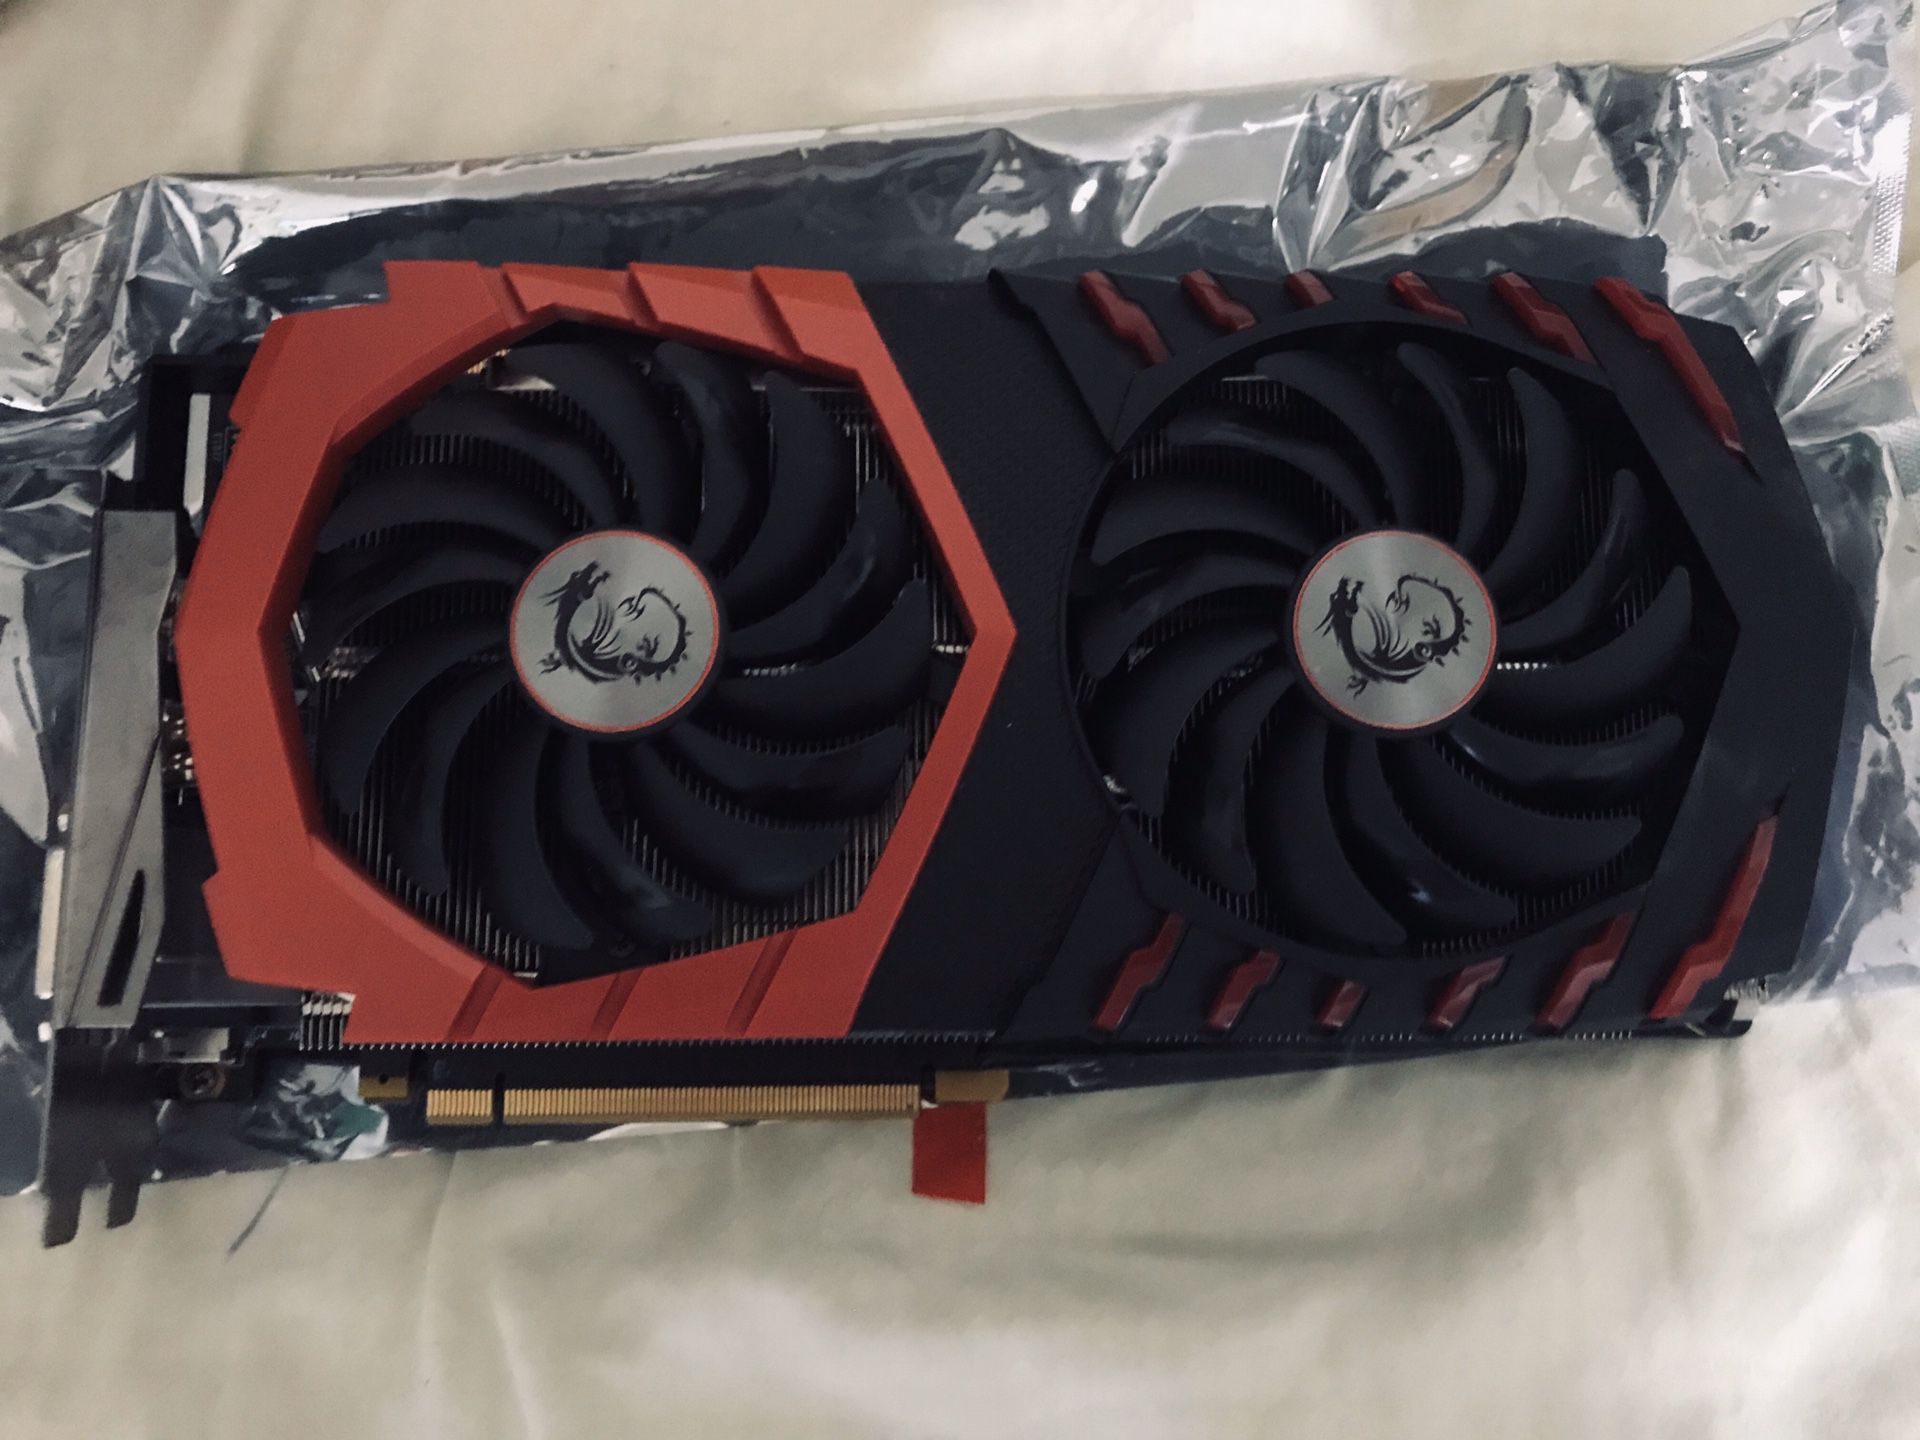 MSI NVIDIA GeForce GTX 1080 Ti 11GB GDDR5X Gaming Graphics Card for Sale in Brooklyn, New York OfferUp